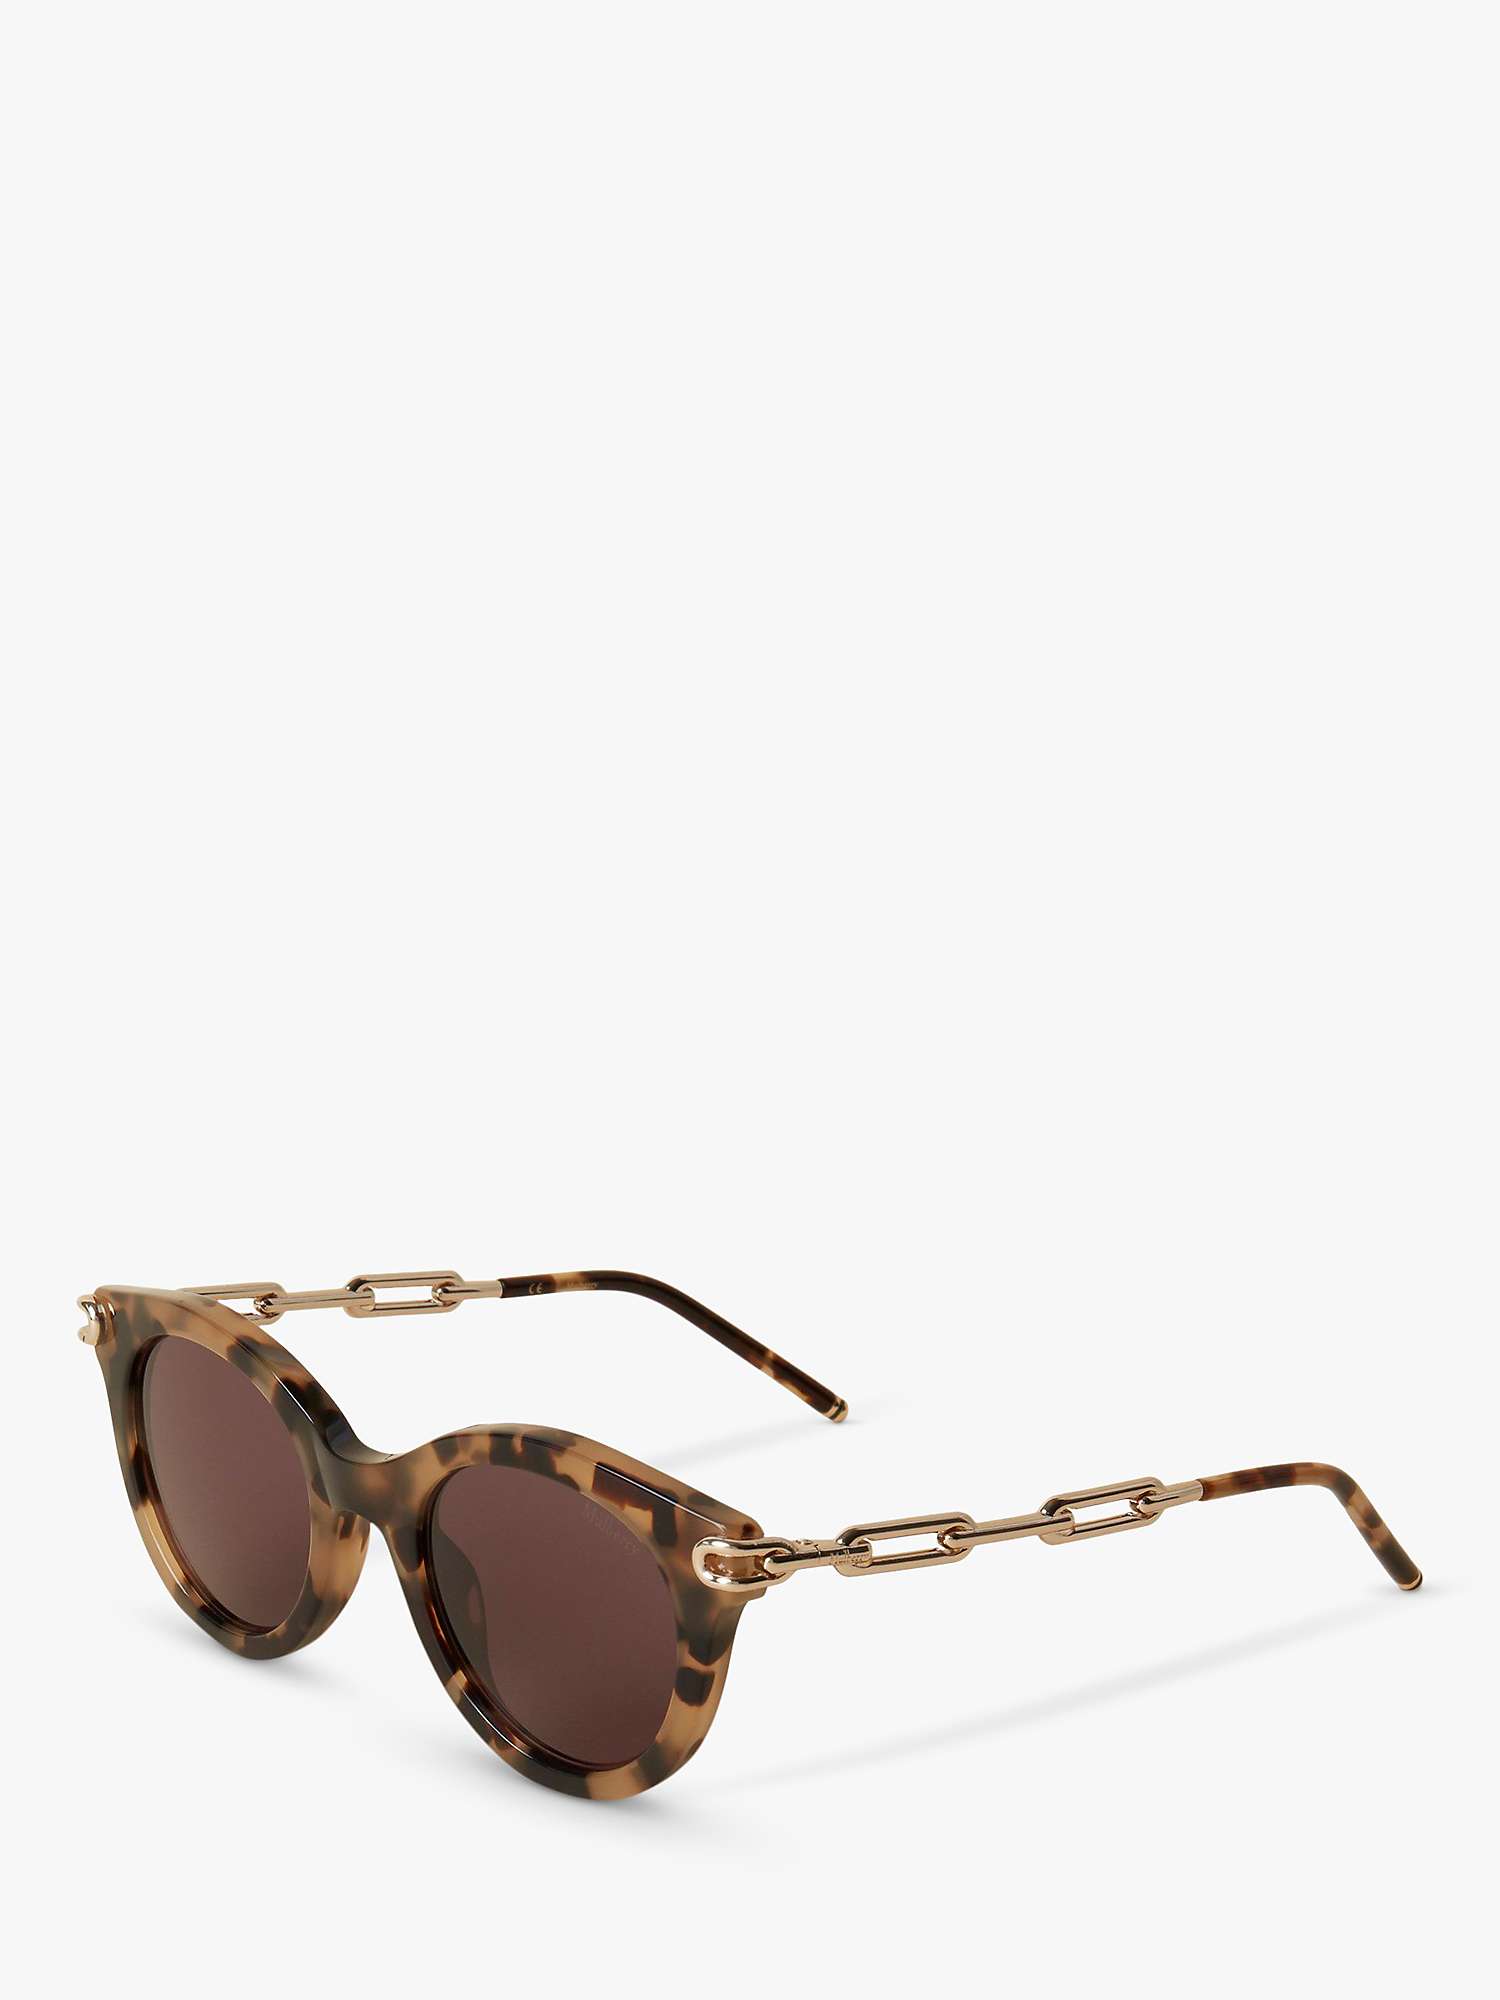 Buy Mulberry Women's Penny Round Sunglasses Online at johnlewis.com